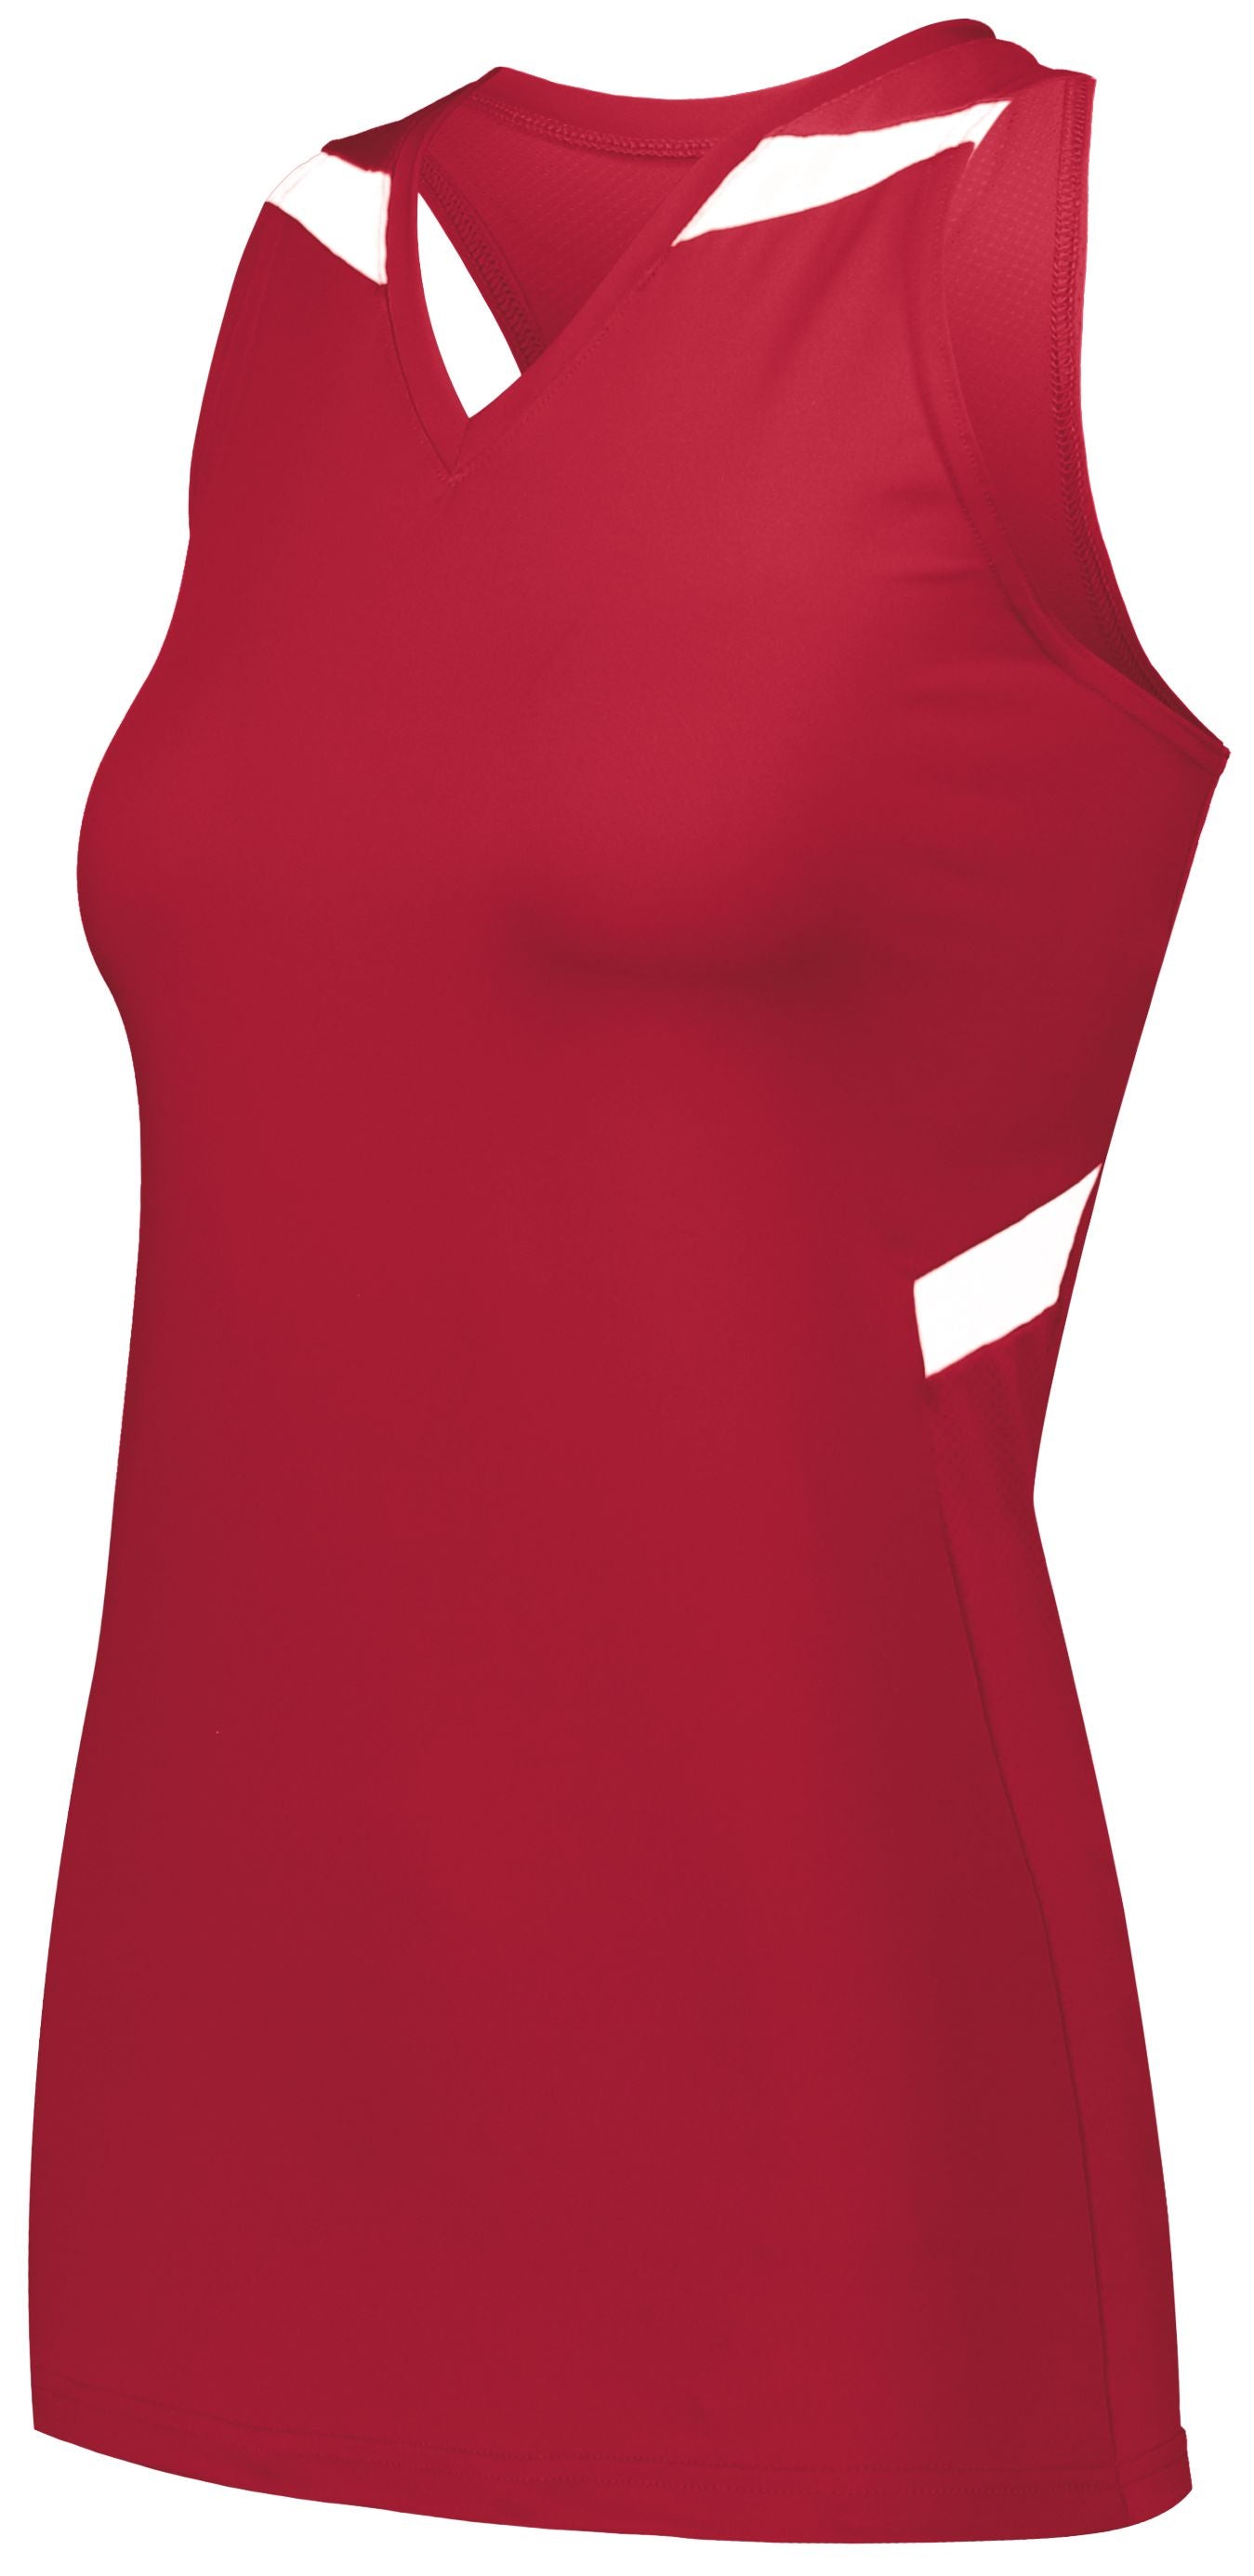 Holloway Ladies Pr Max Compression Jersey in Scarlet/White  -Part of the Ladies, Ladies-Jersey, Track-Field, Holloway, Shirts product lines at KanaleyCreations.com